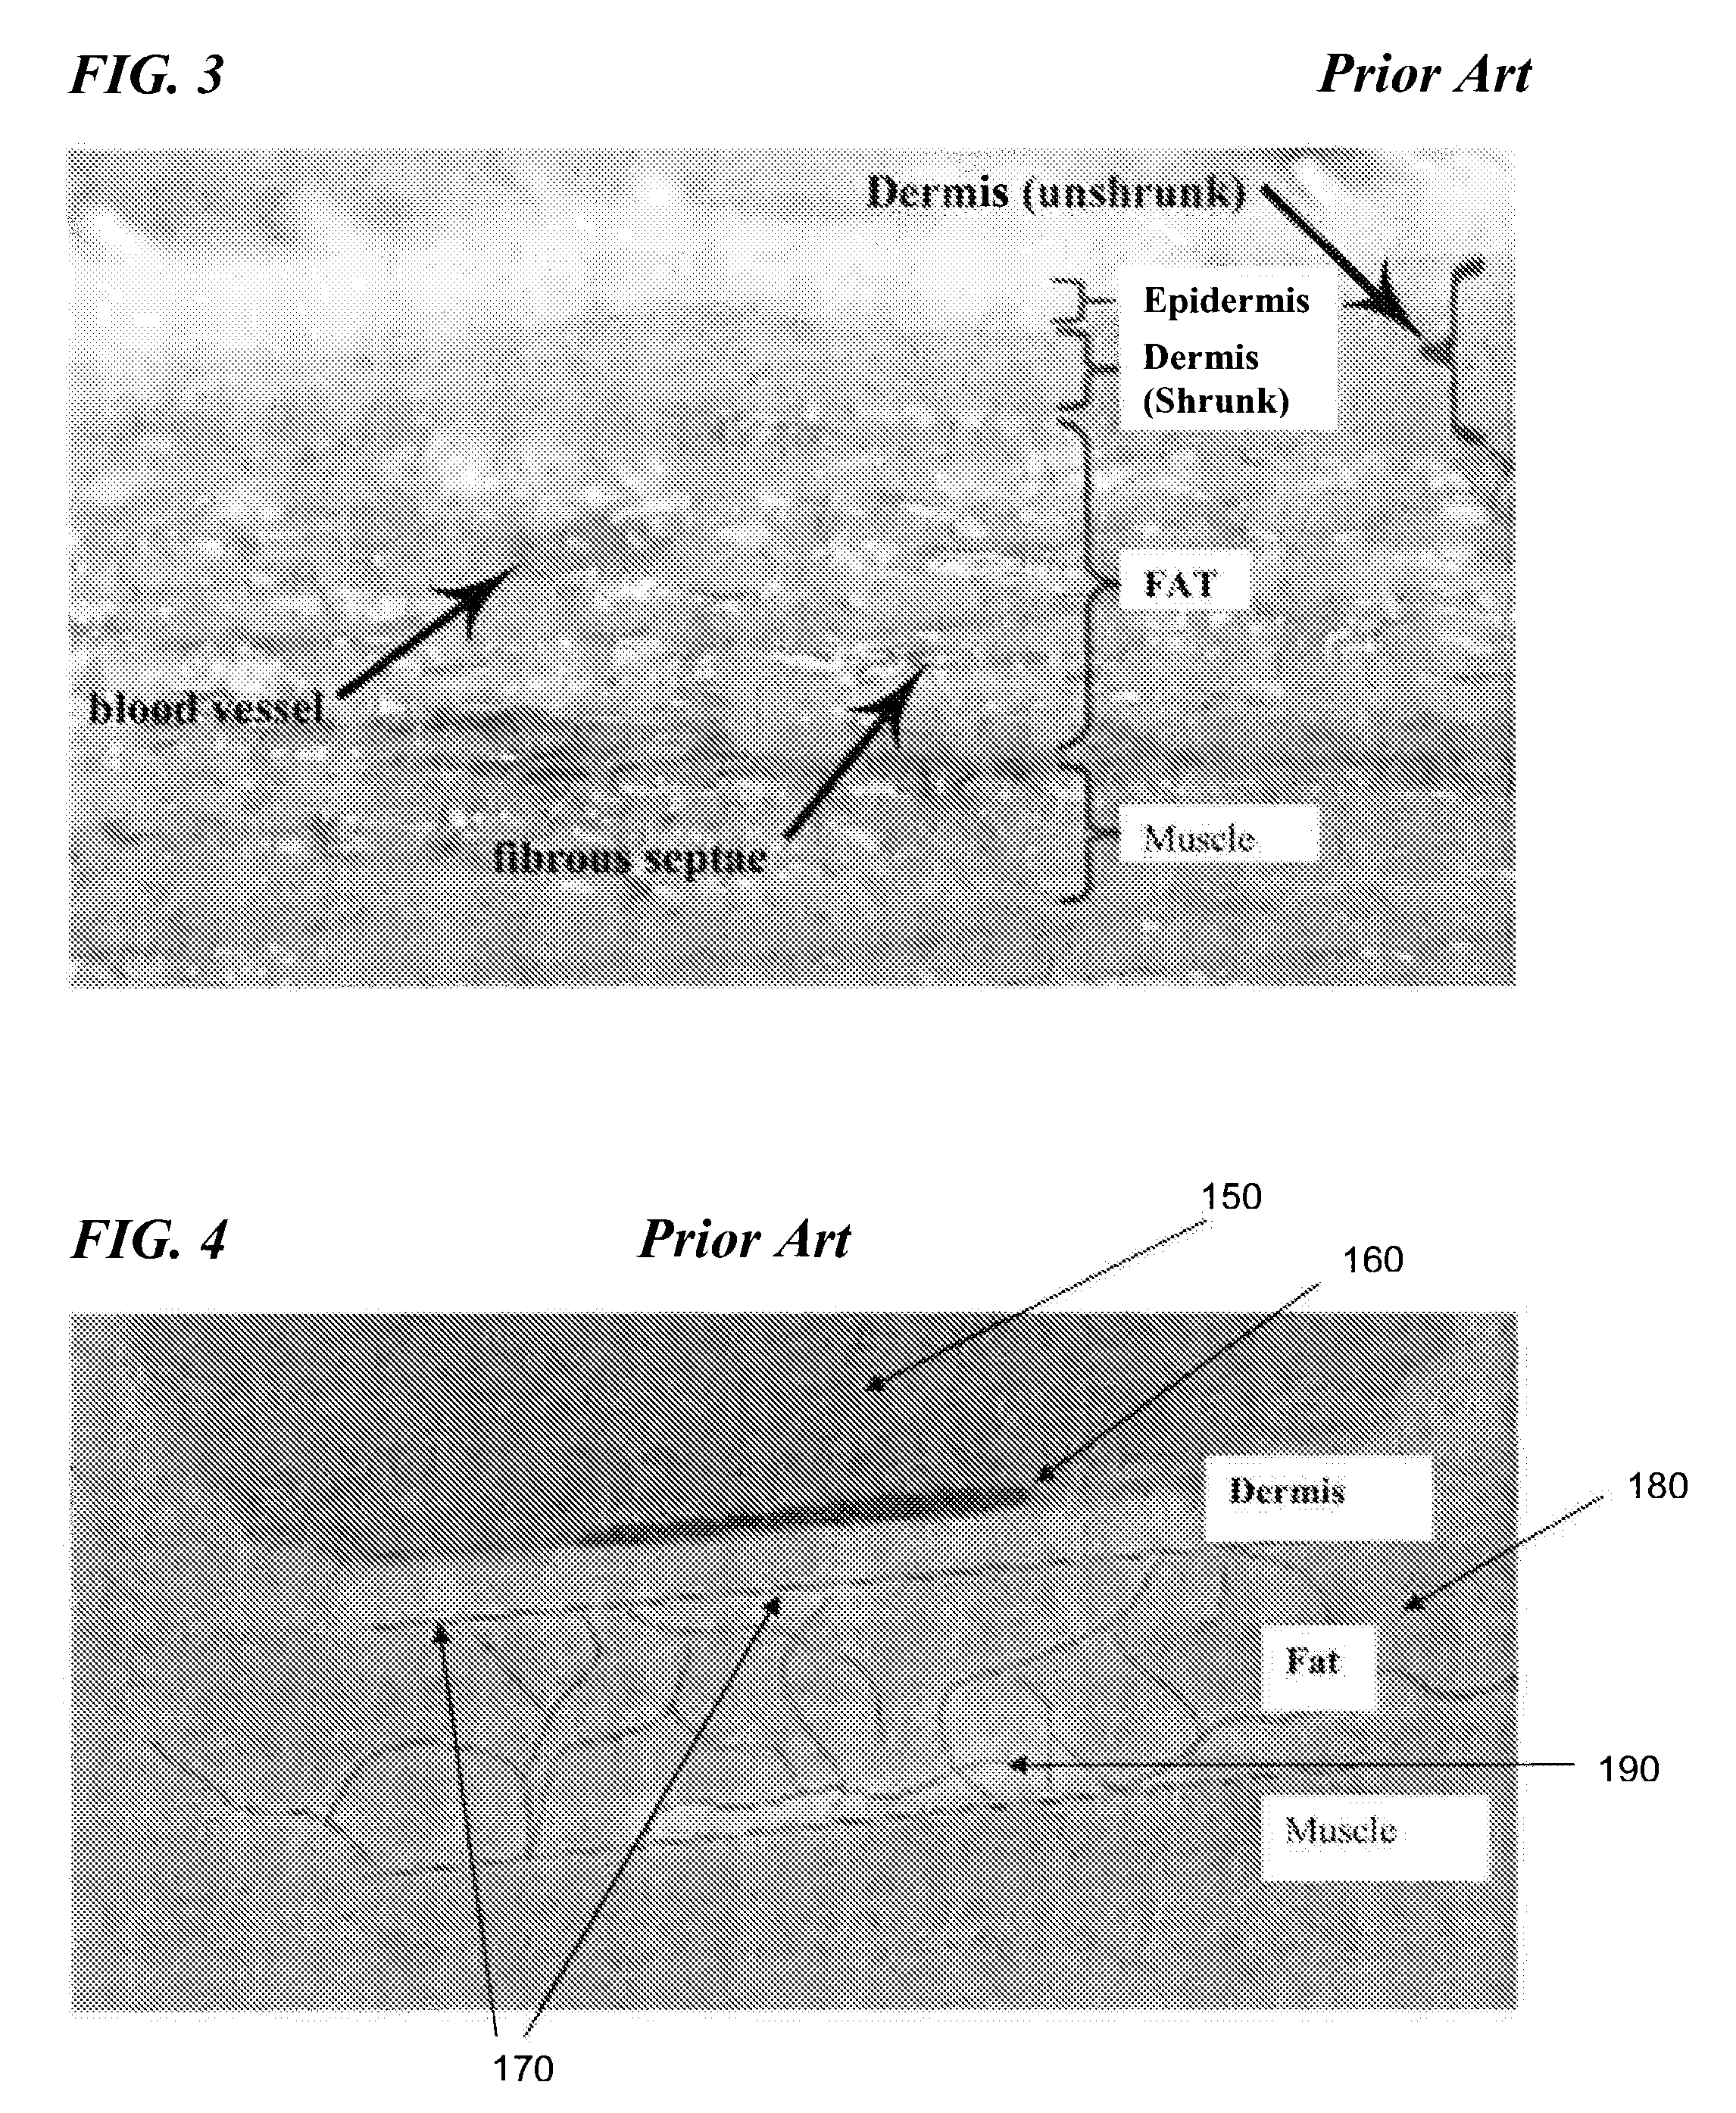 Acoustic applicators for controlled thermal modification of tissue